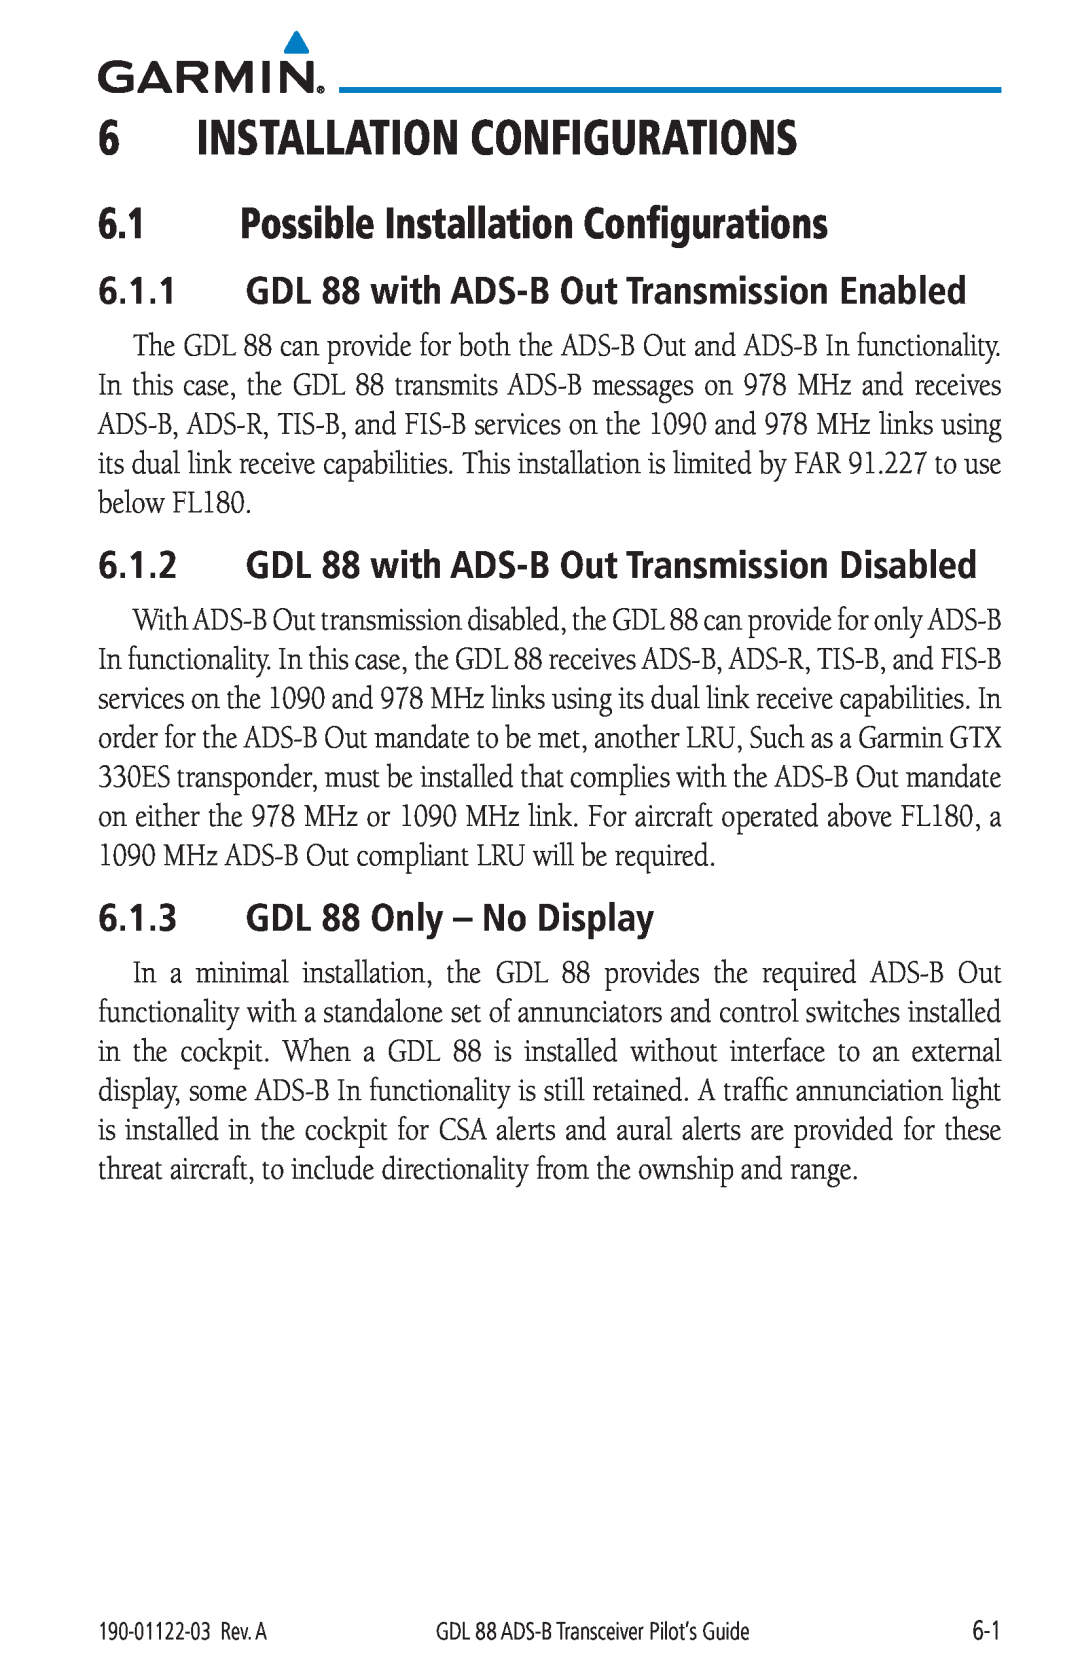 Garmin Possible Installation Configurations, GDL 88 Only - No Display, GDL 88 with ADS-B Out Transmission Enabled 